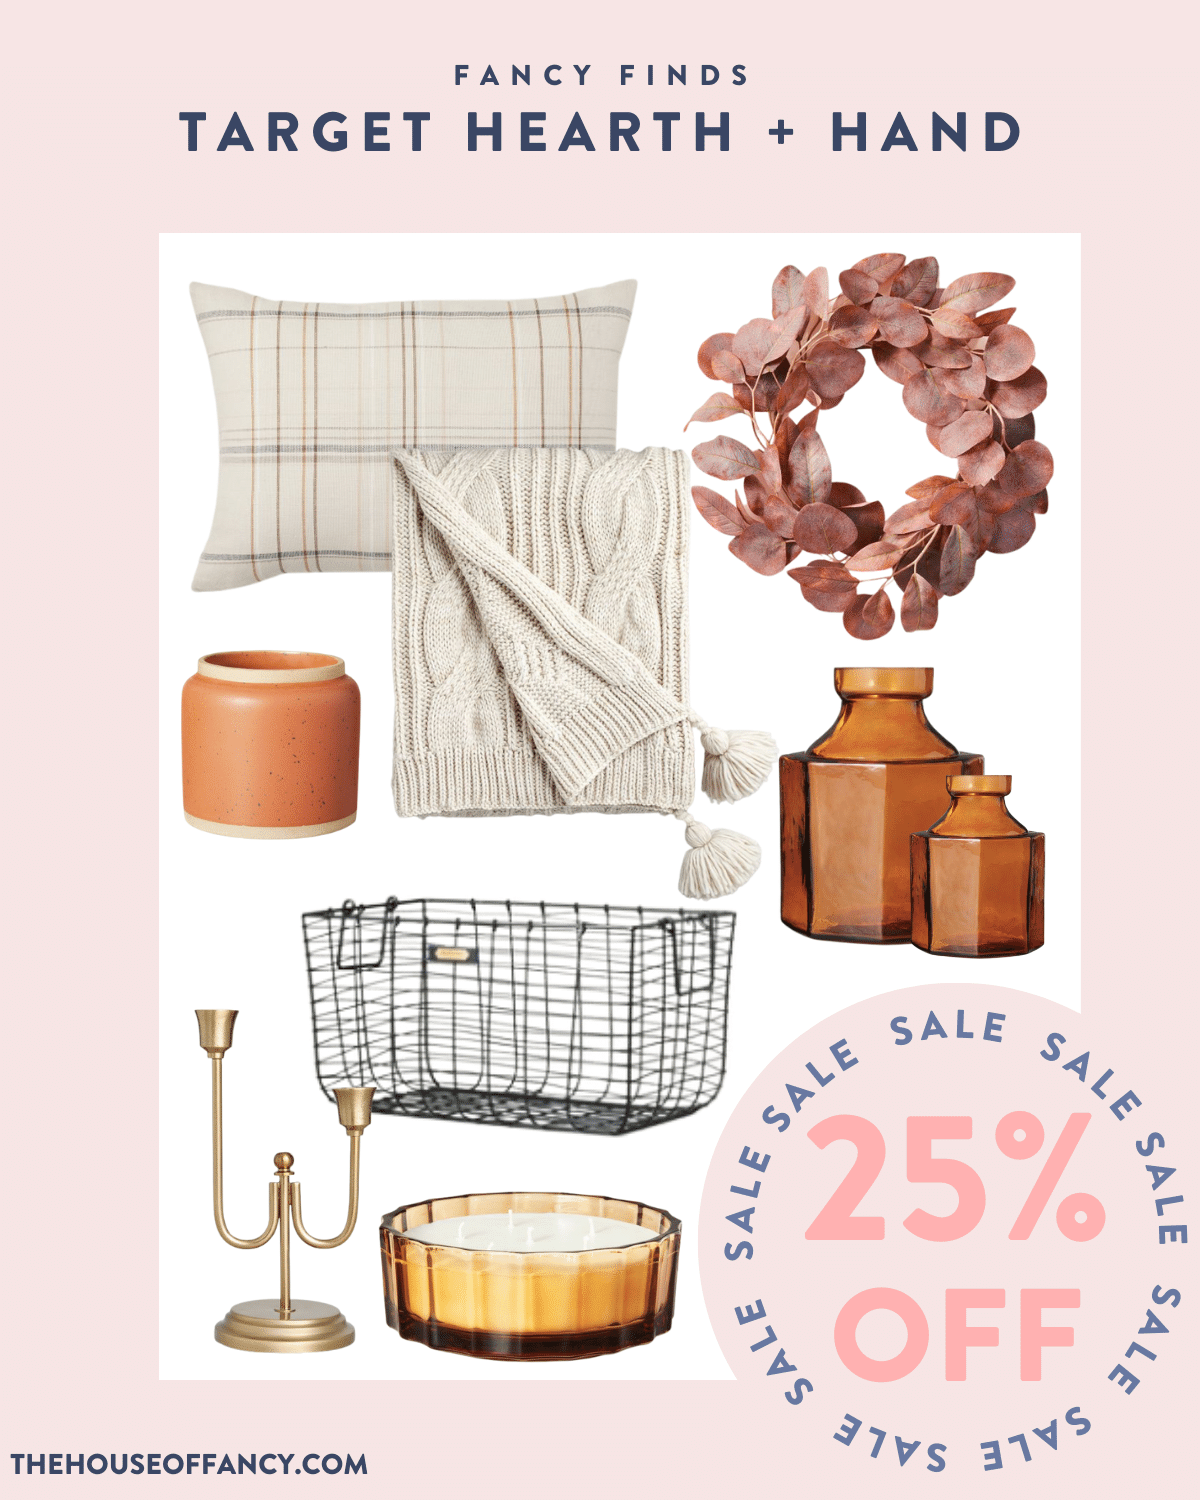 Fancy Finds from Target's Hearth & Hand Collection. On sale now for 25% off.